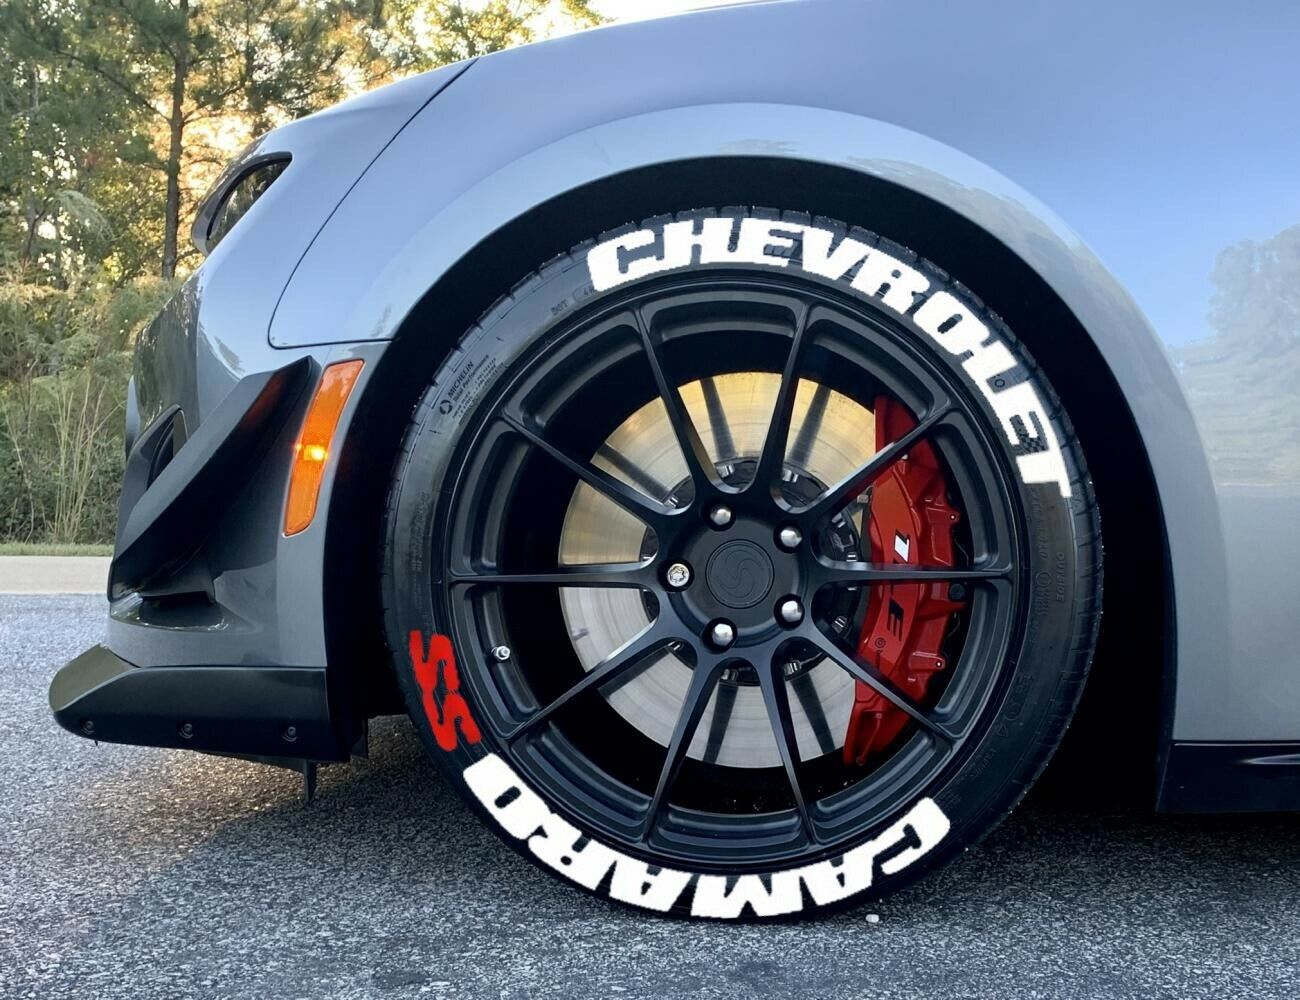  Tire Lettering stickers Chevrolet Camaro SS  1.25